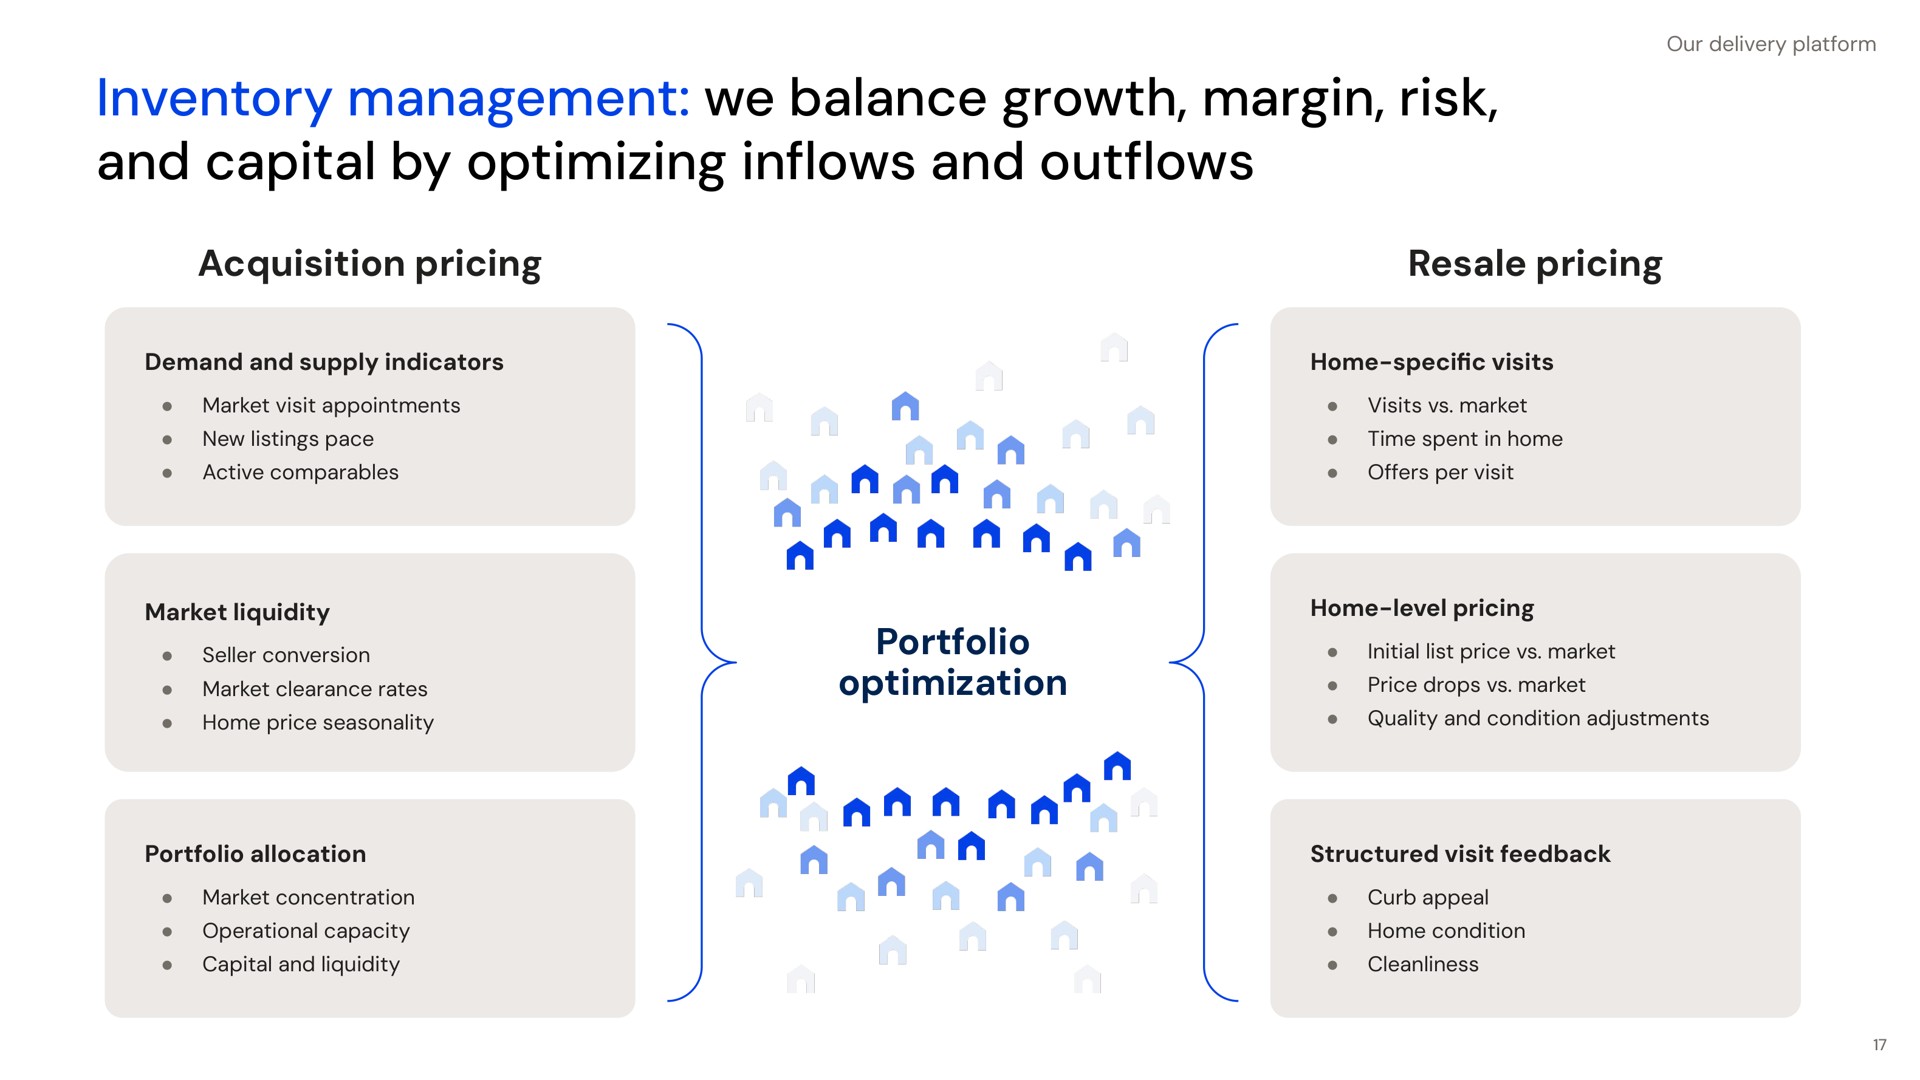 inventory management we balance growth margin risk and capital by optimizing in and out acquisition pricing resale pricing demand and supply indicators market liquidity portfolio allocation home visits portfolio optimization home level pricing structured visit feedback inflows outflows | Opendoor